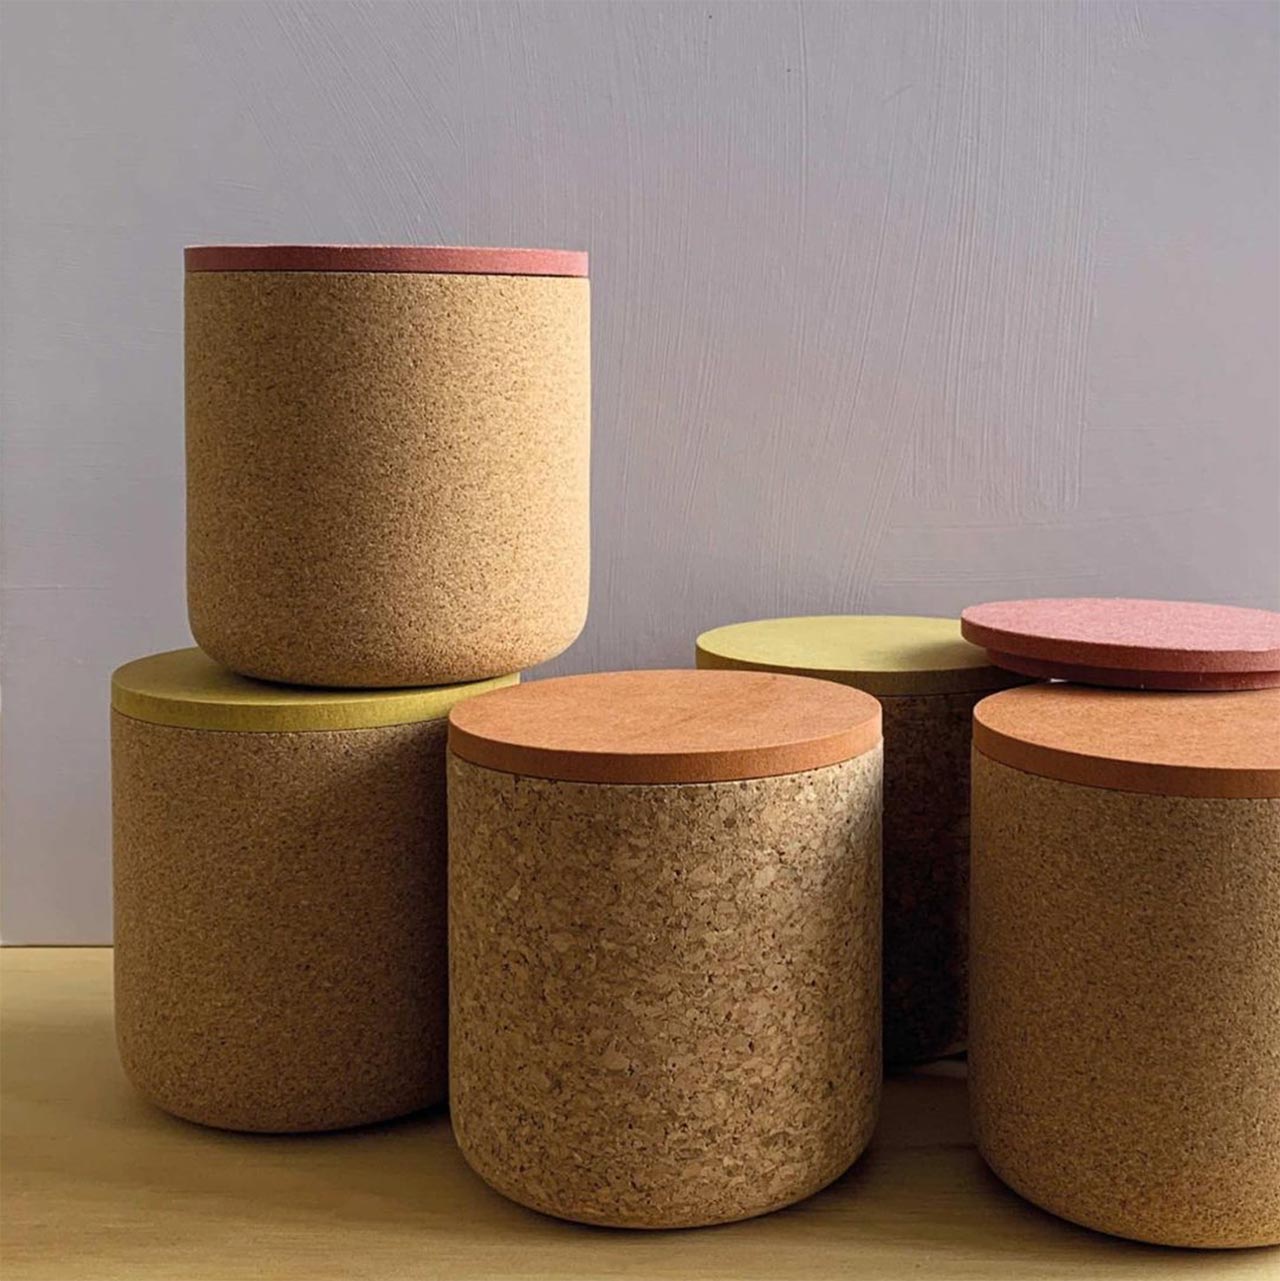 six cork posts with different coloured lids